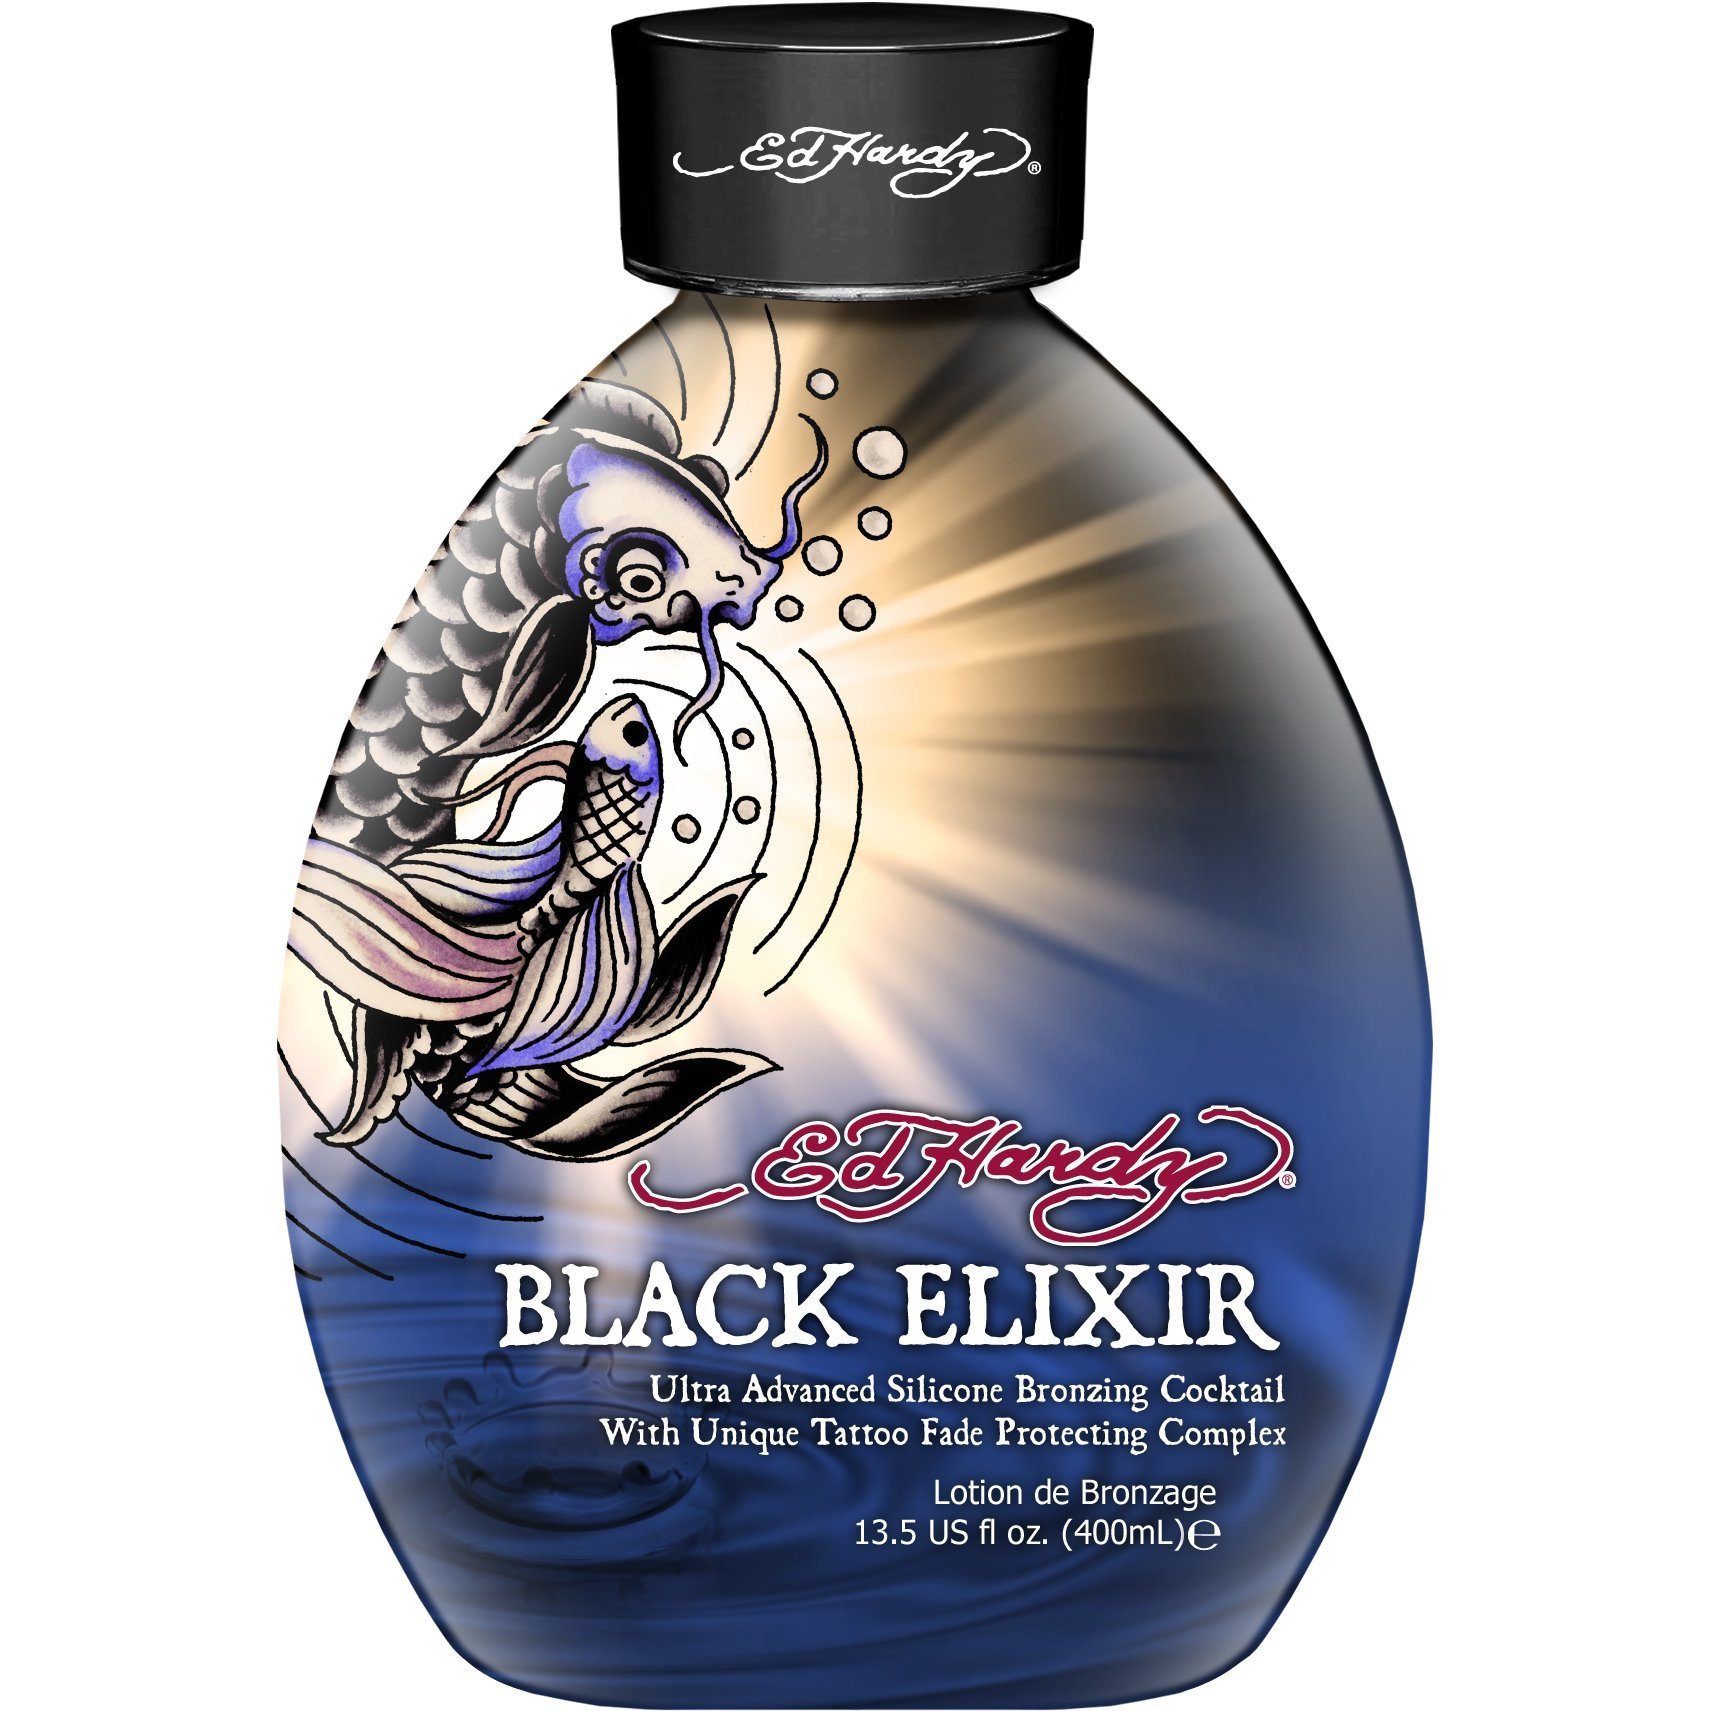 Ed Hardy Elixir Silicone Bronzer Tattoo Fade Protection Tanning Lotion, 13.5 oz, Black